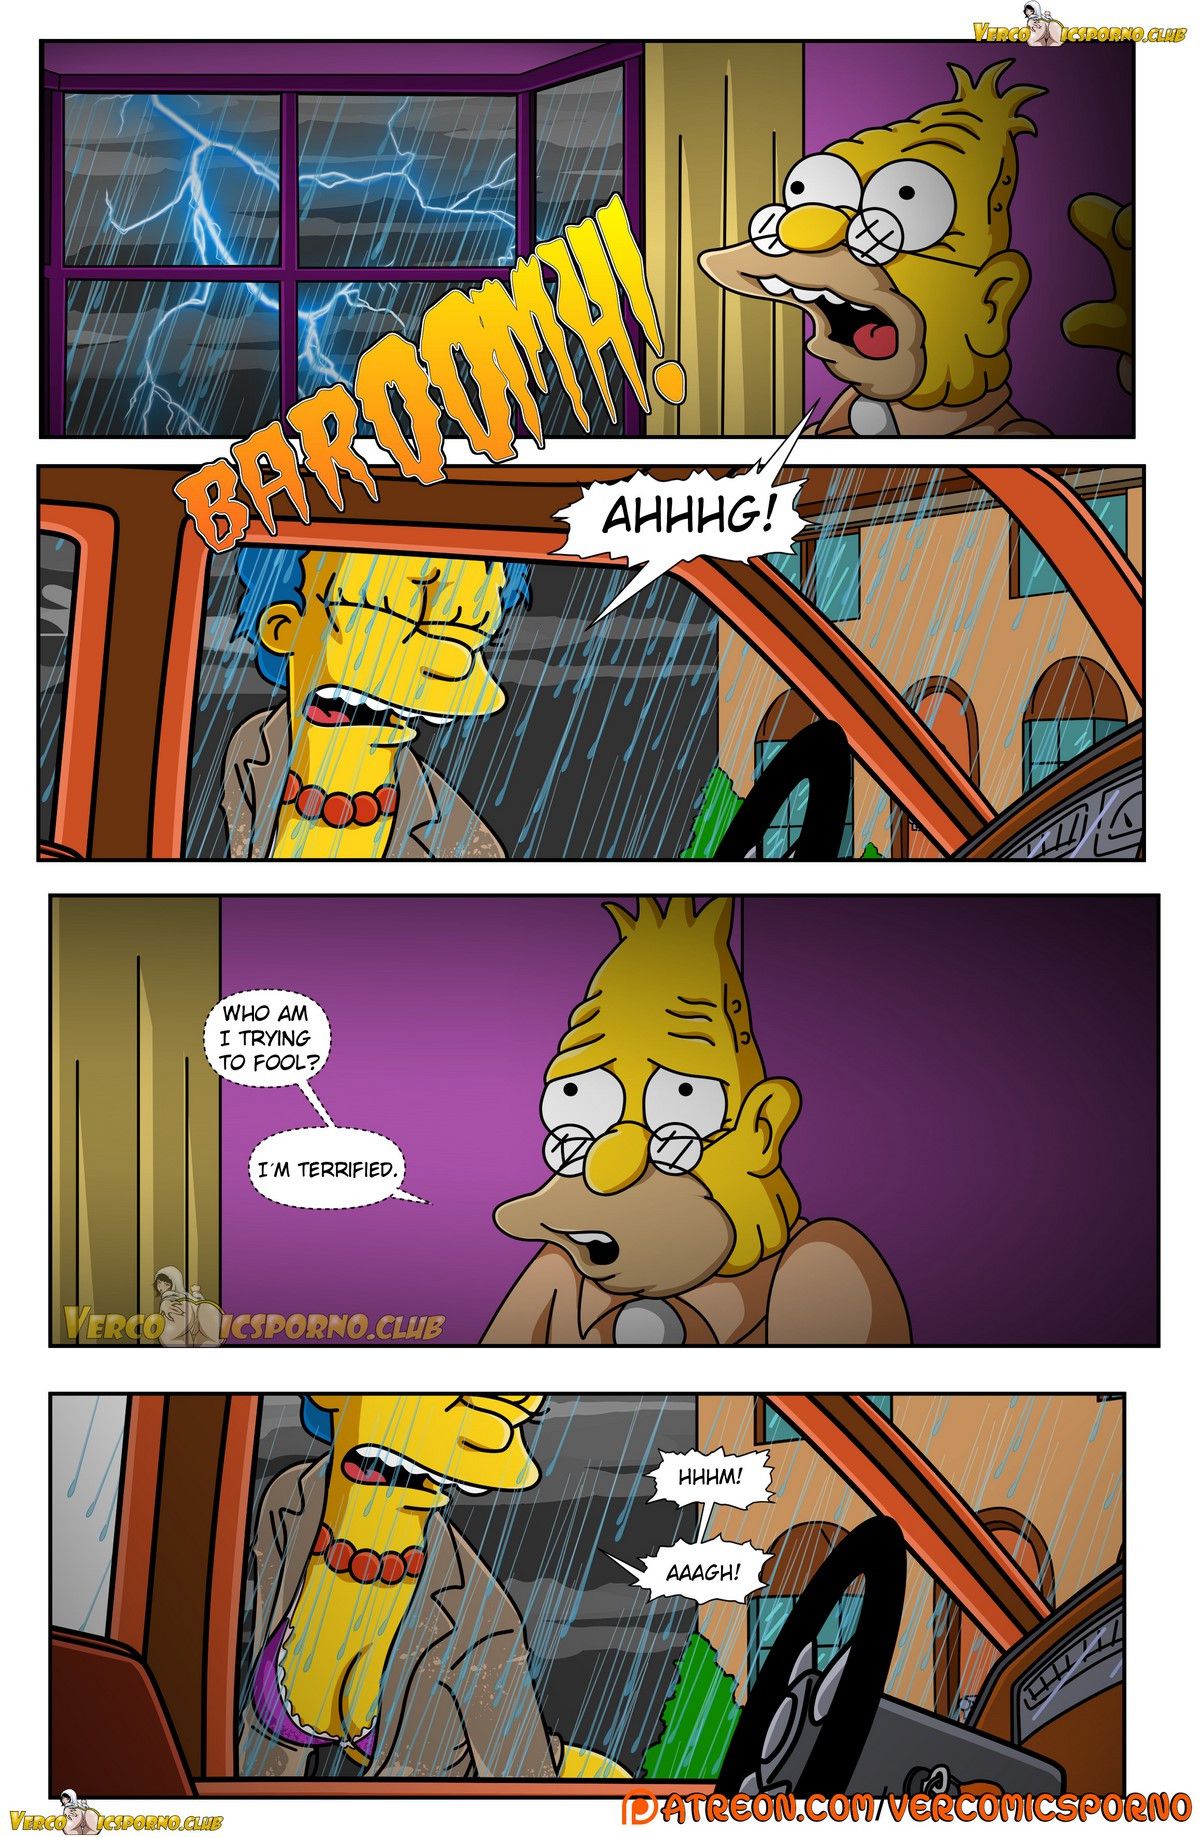 Grandpa and me - [Itooneaxxx] - [Drah Navlag] - [VCP] - [The Simpsons] 18